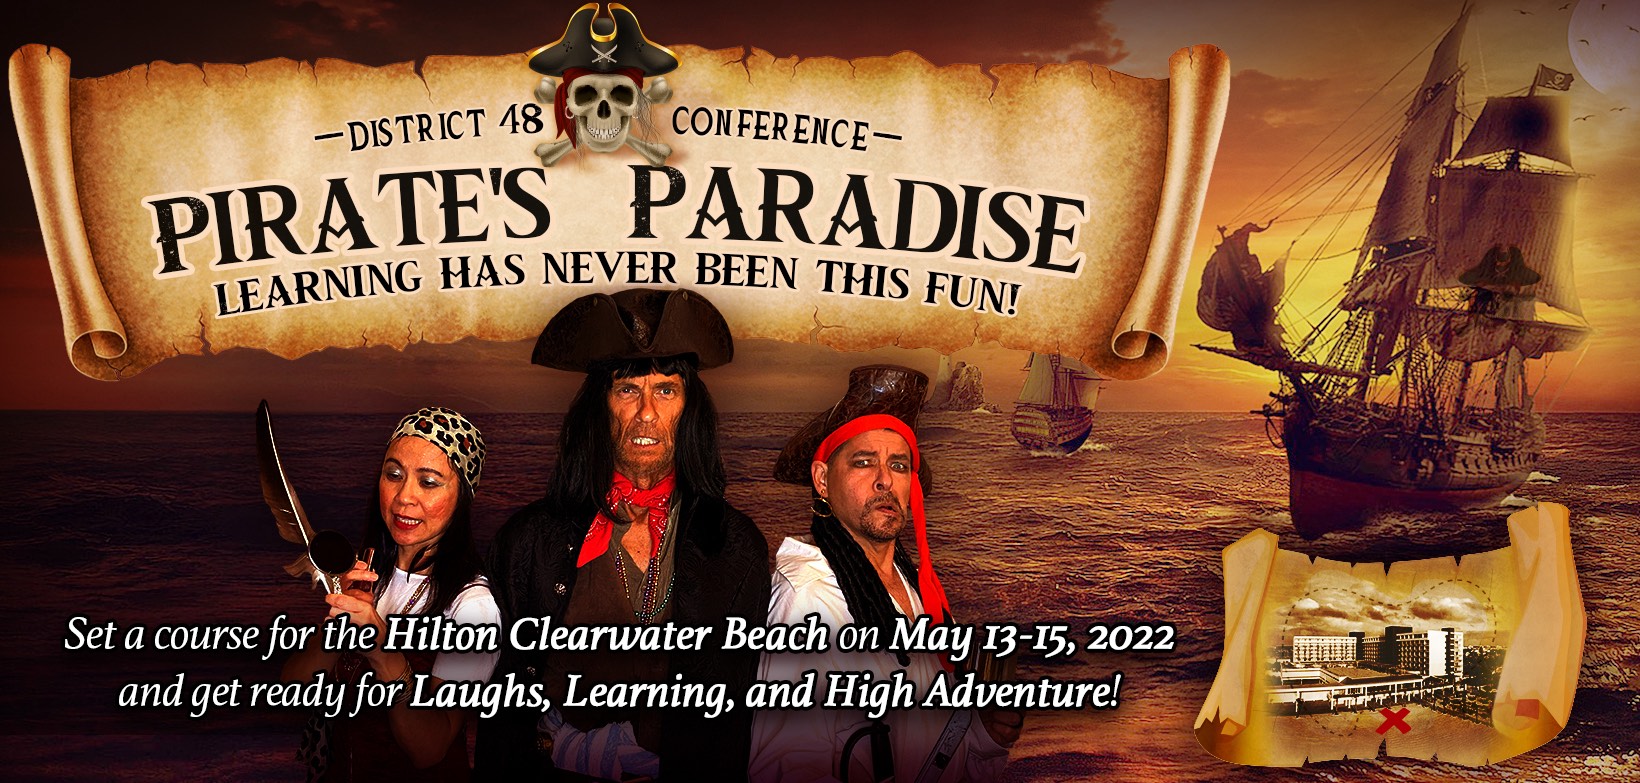 District 48 Conference 2022 main Image: Pirate's Paradise